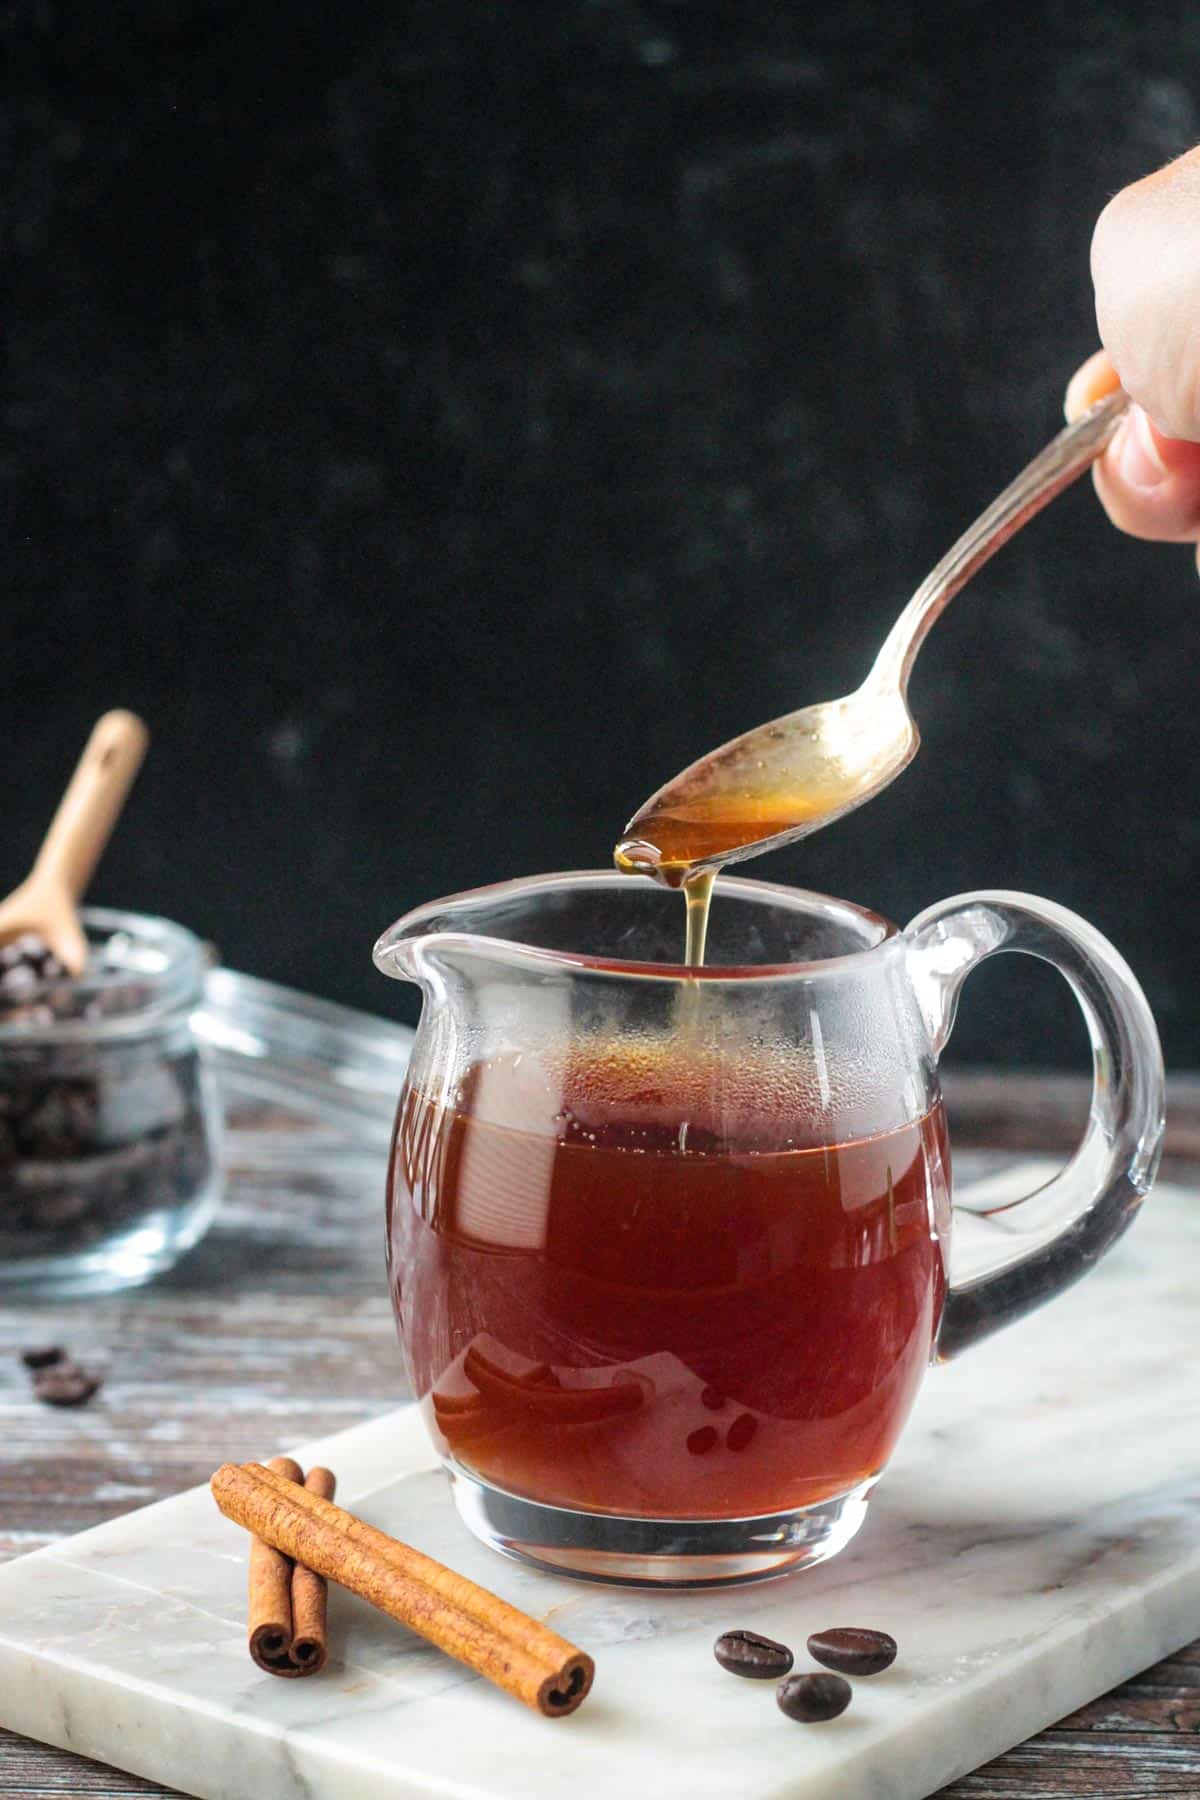 Apple brown sugar syrup drizzled off of a spoon into a glass.